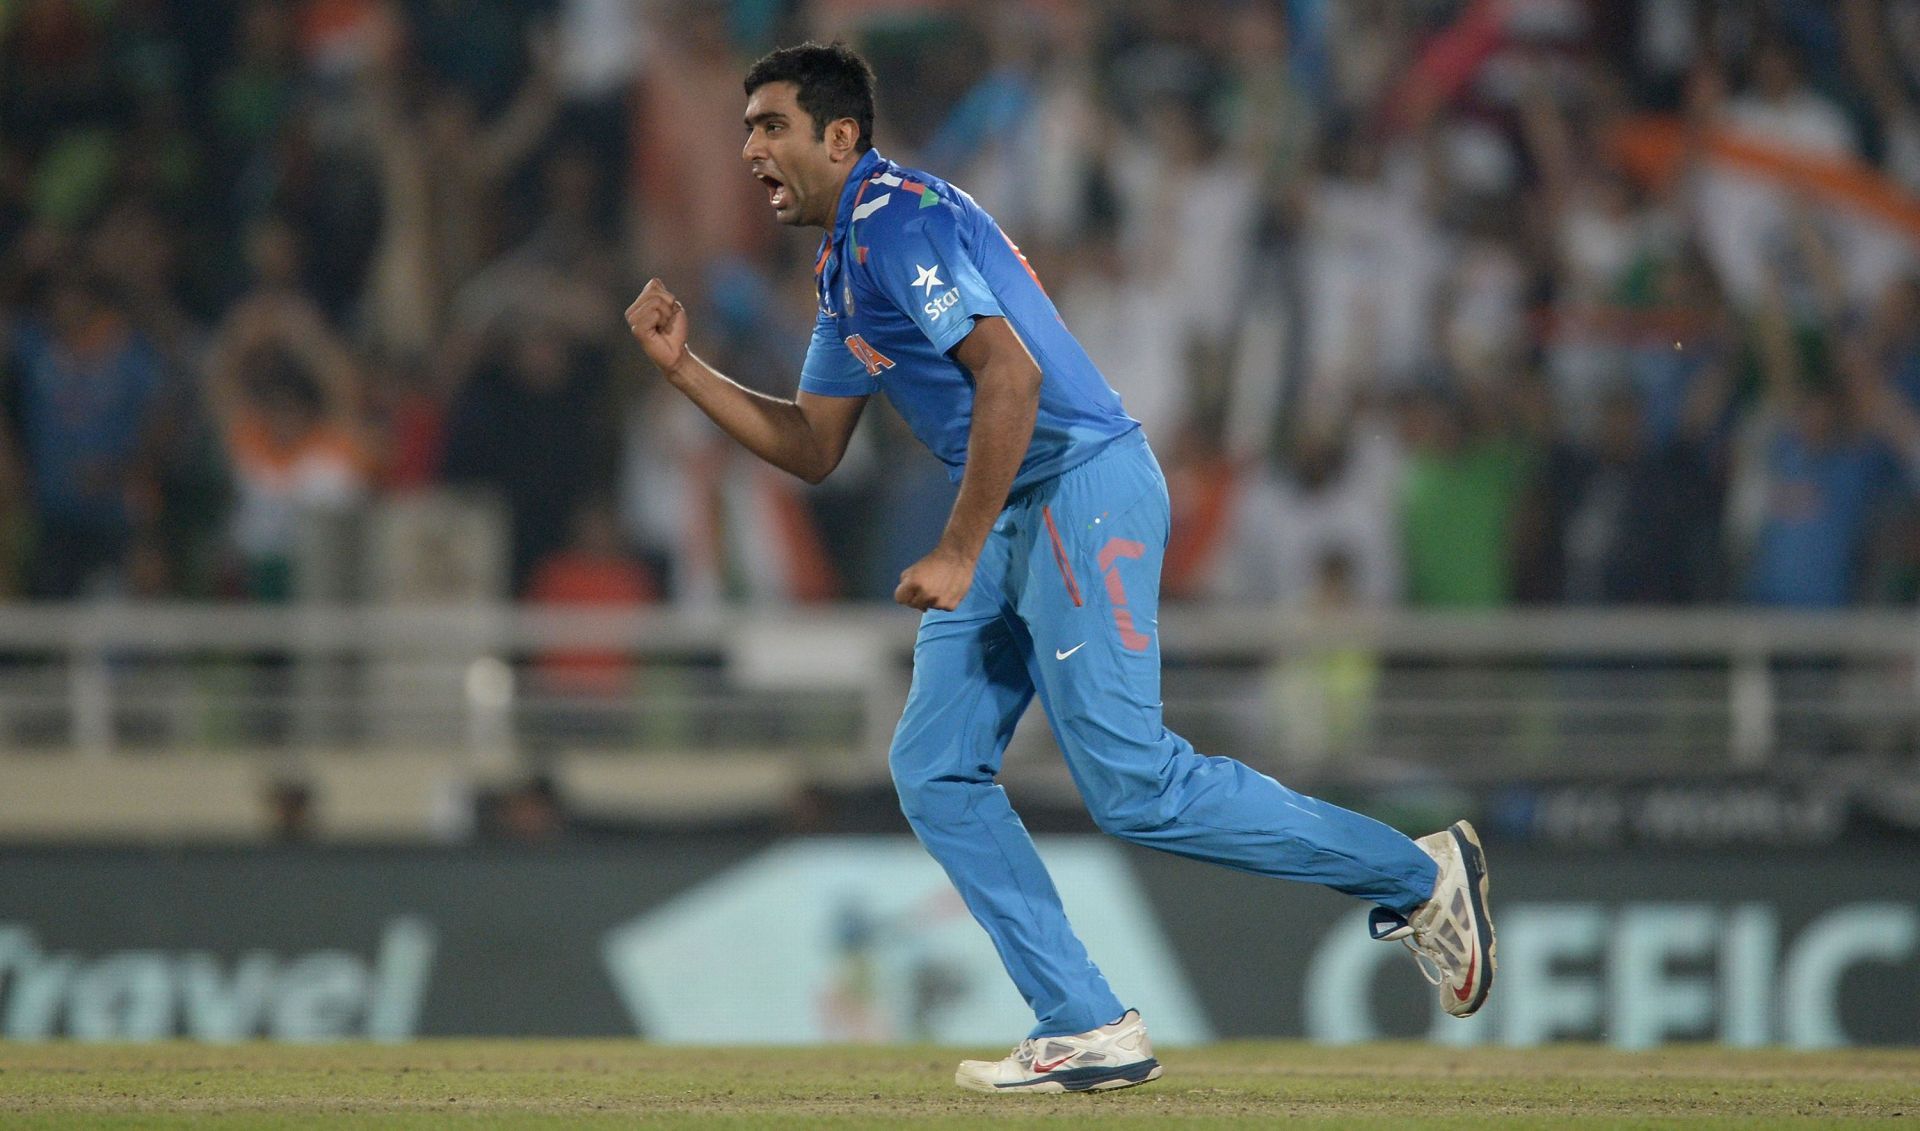 Ashwin bowled a magical spell against South Africa in the 2014 T20 World Cup